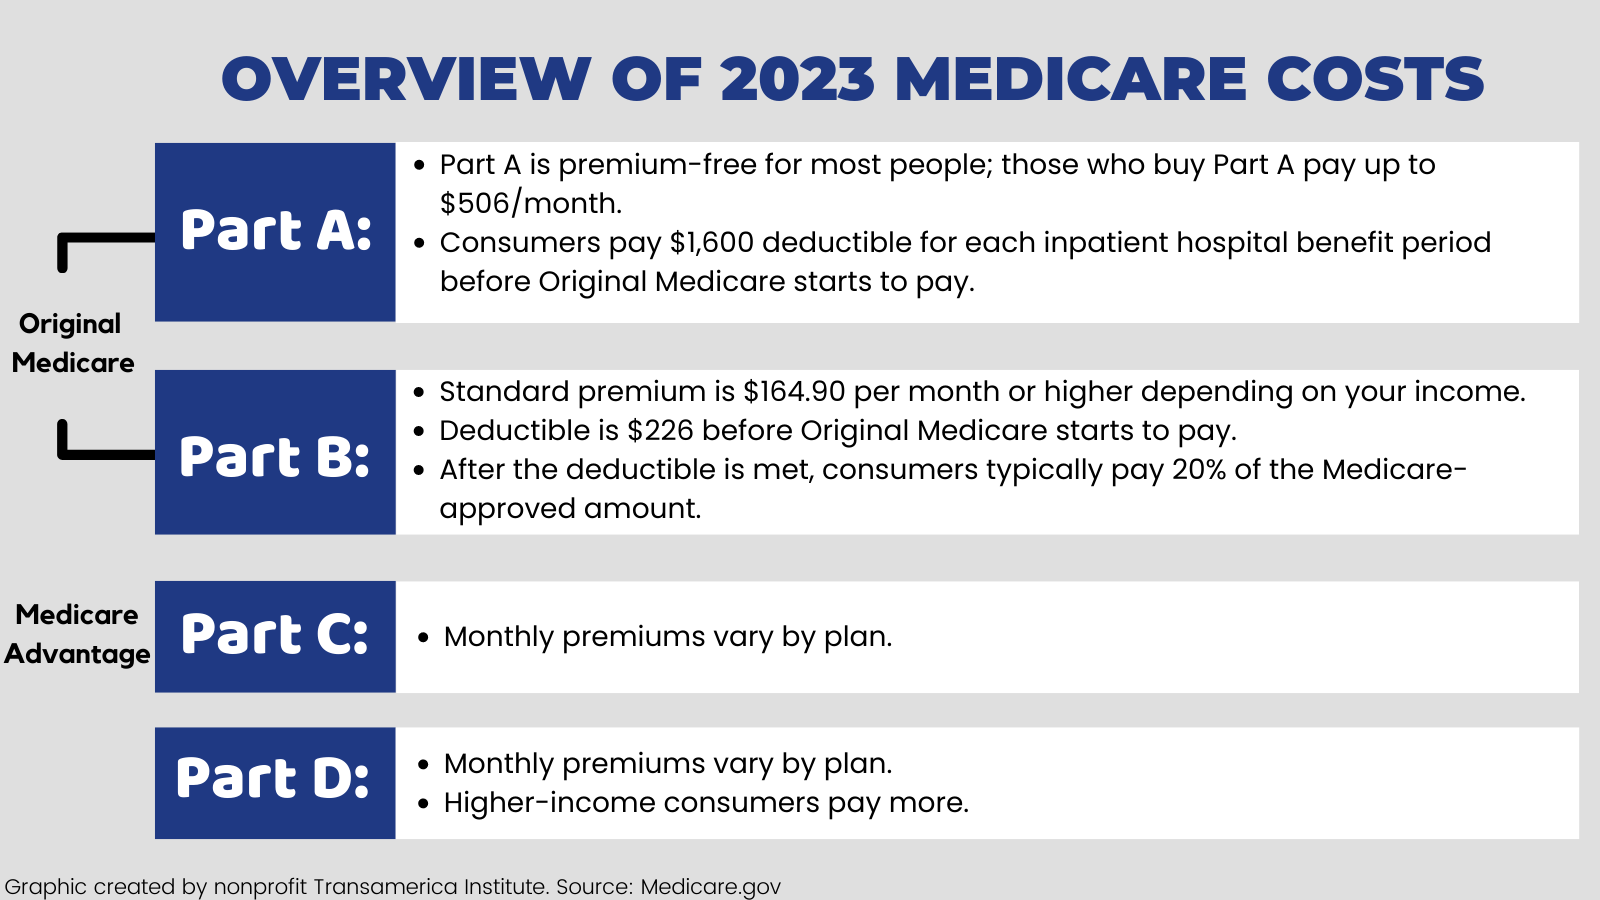 2023 Medicare Costs Overview